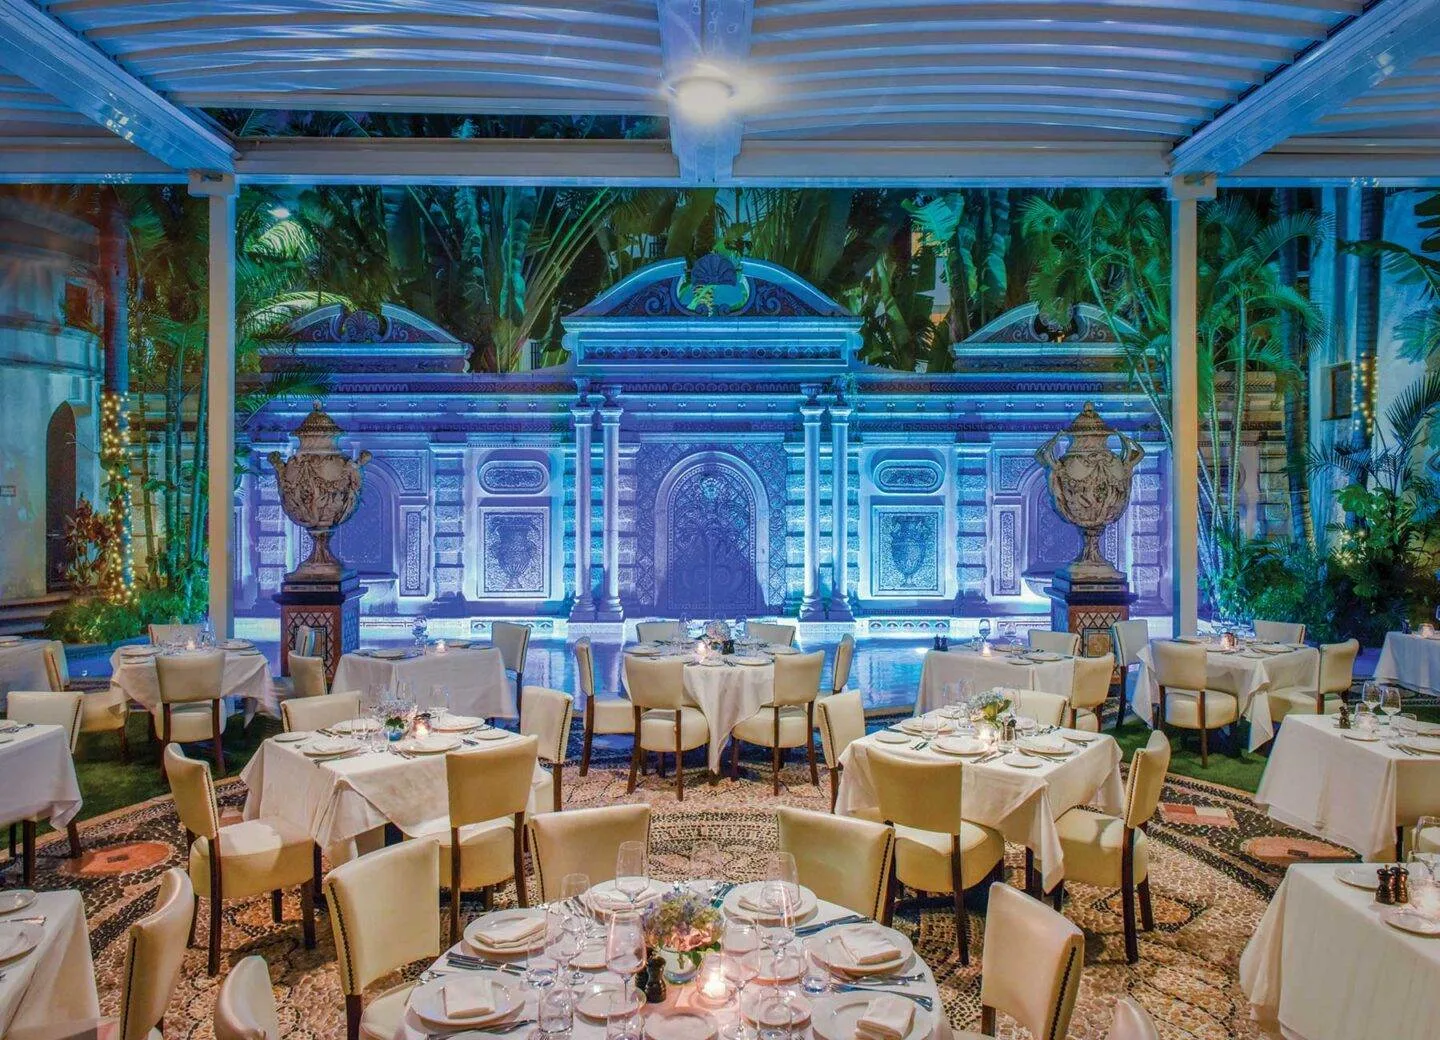 Gianni's wins for the most opulent fine dining restaurant on this list of best restaurants in South Beach. The interior is absolutely stunning!